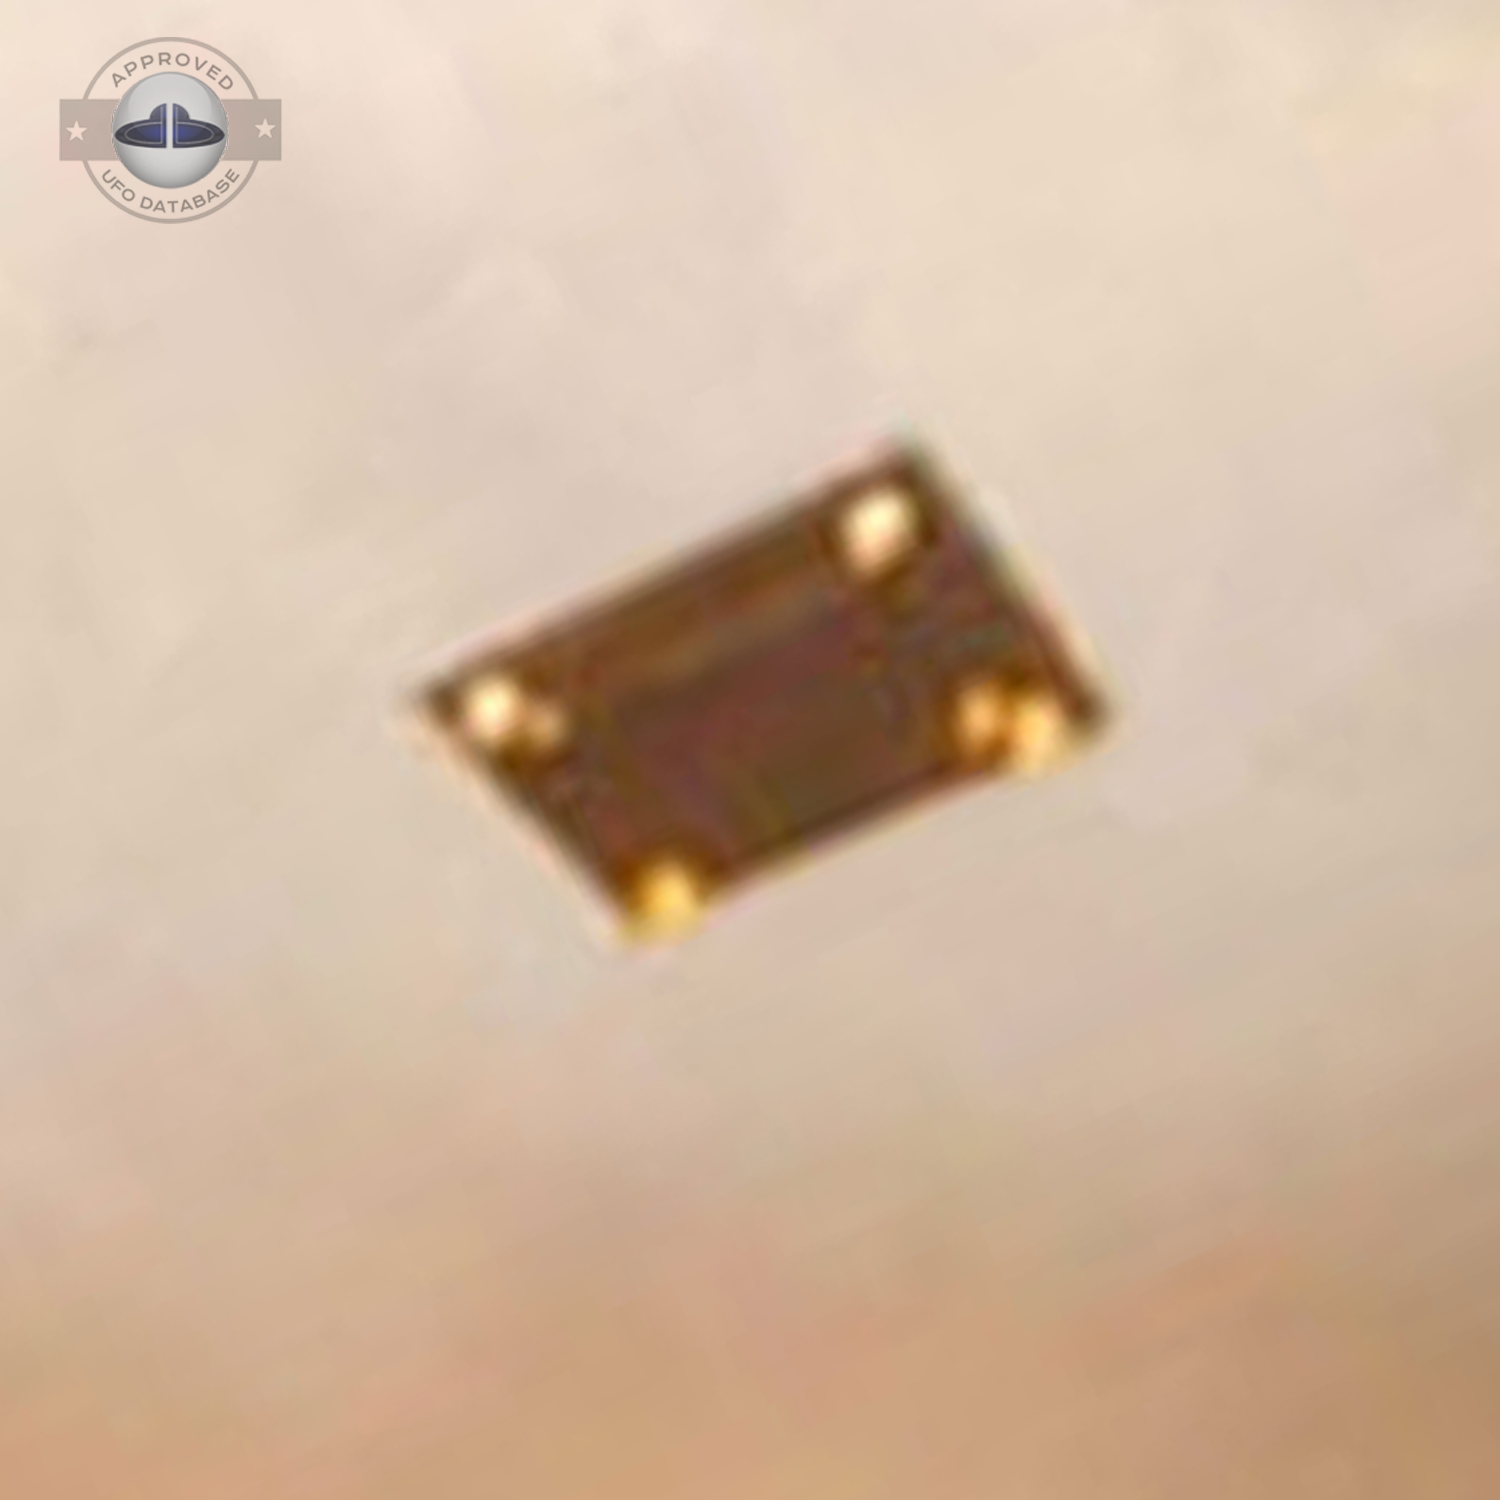 Incredible UFO picture showing a square shaped UFO Kanarraville USA UFO Picture #98-5